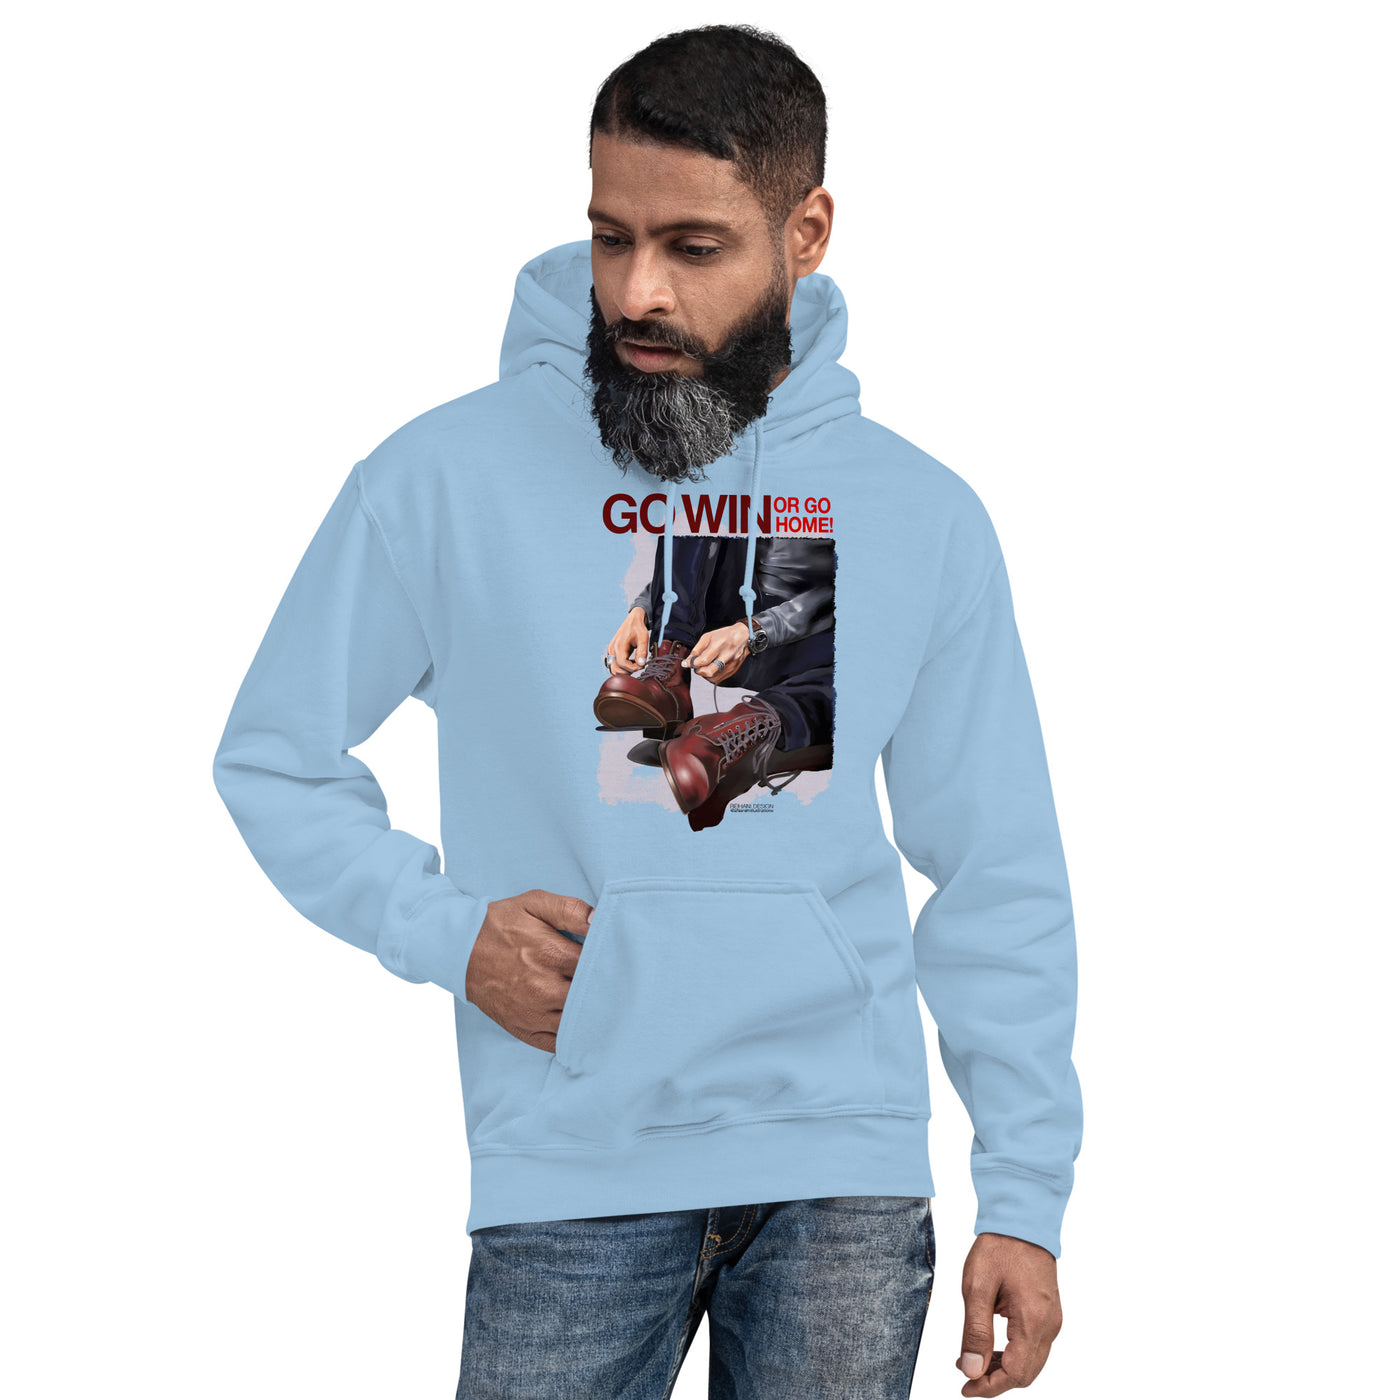 Unisex Hoodie with motivation message